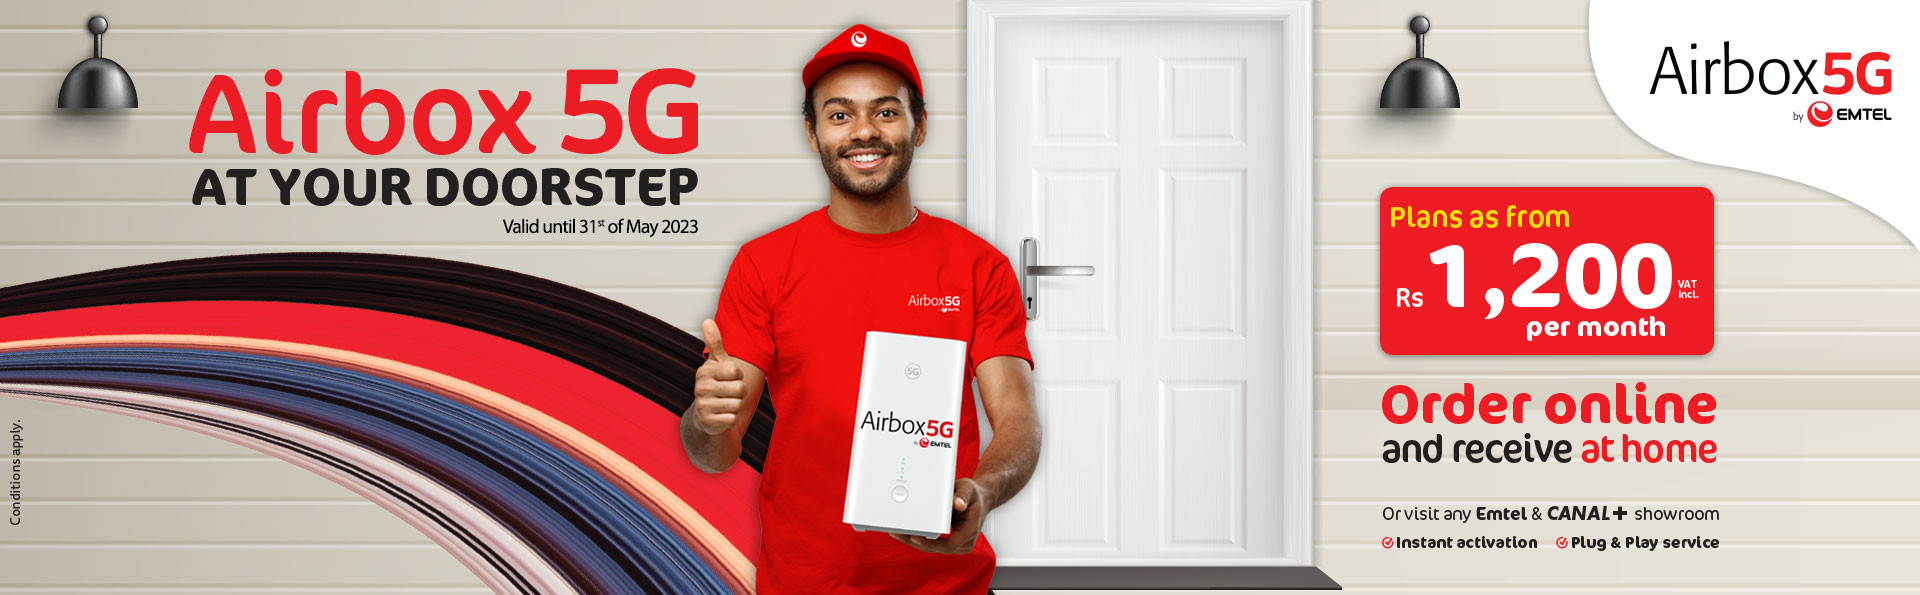 AIRBOX5G AT YOUR DOORSTEP